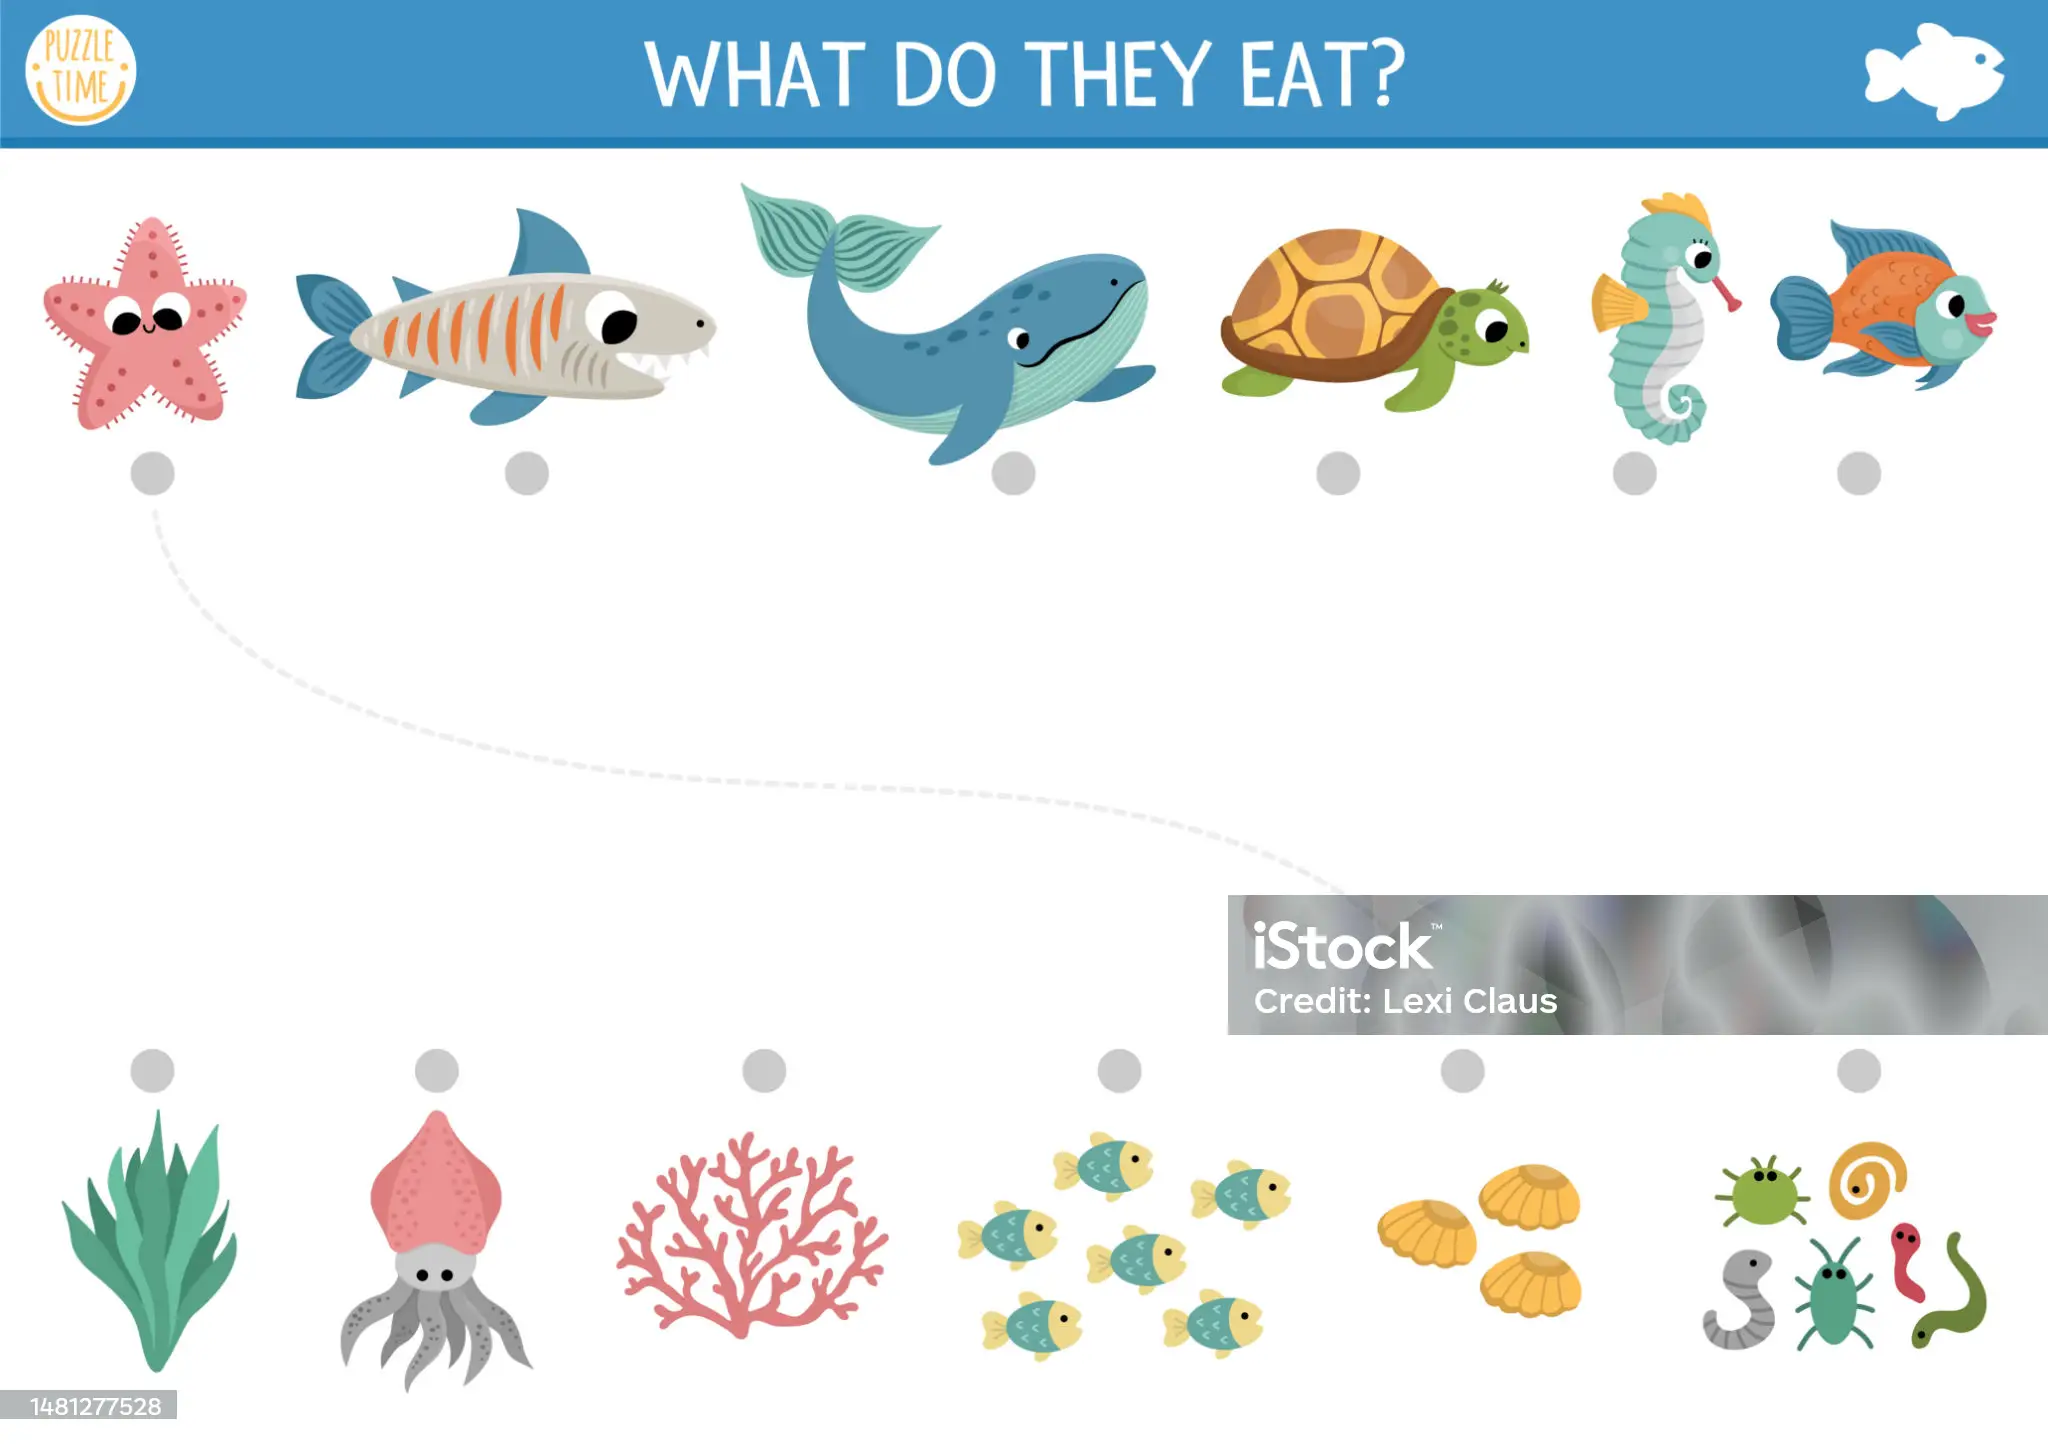 Tech Innovations in Animal Feed: Revolutionizing Nutrition For Better Animal Health : Under the sea matching activity with cute fish and food. Water puzzle with whale, turtle, seahorse, shark